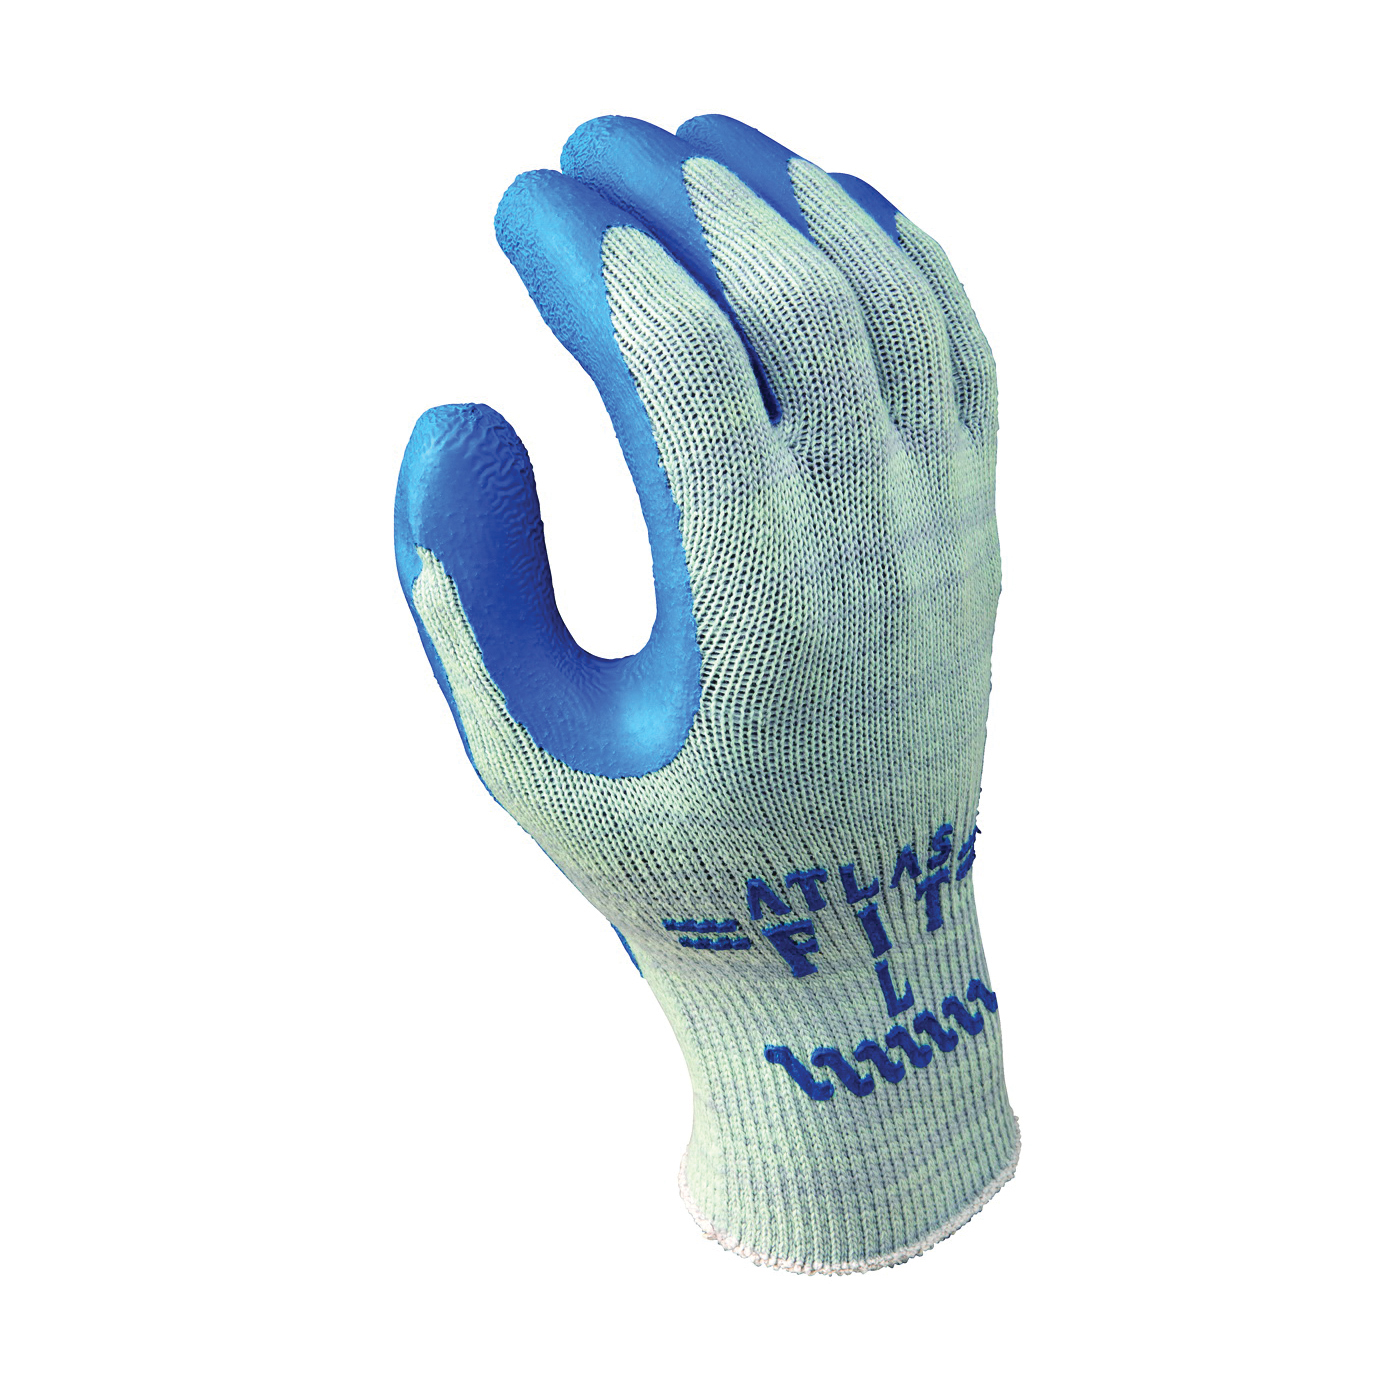 300M-08.RT Industrial Gloves, M, Knit Wrist Cuff, Natural Rubber Coating, Blue/Light Gray